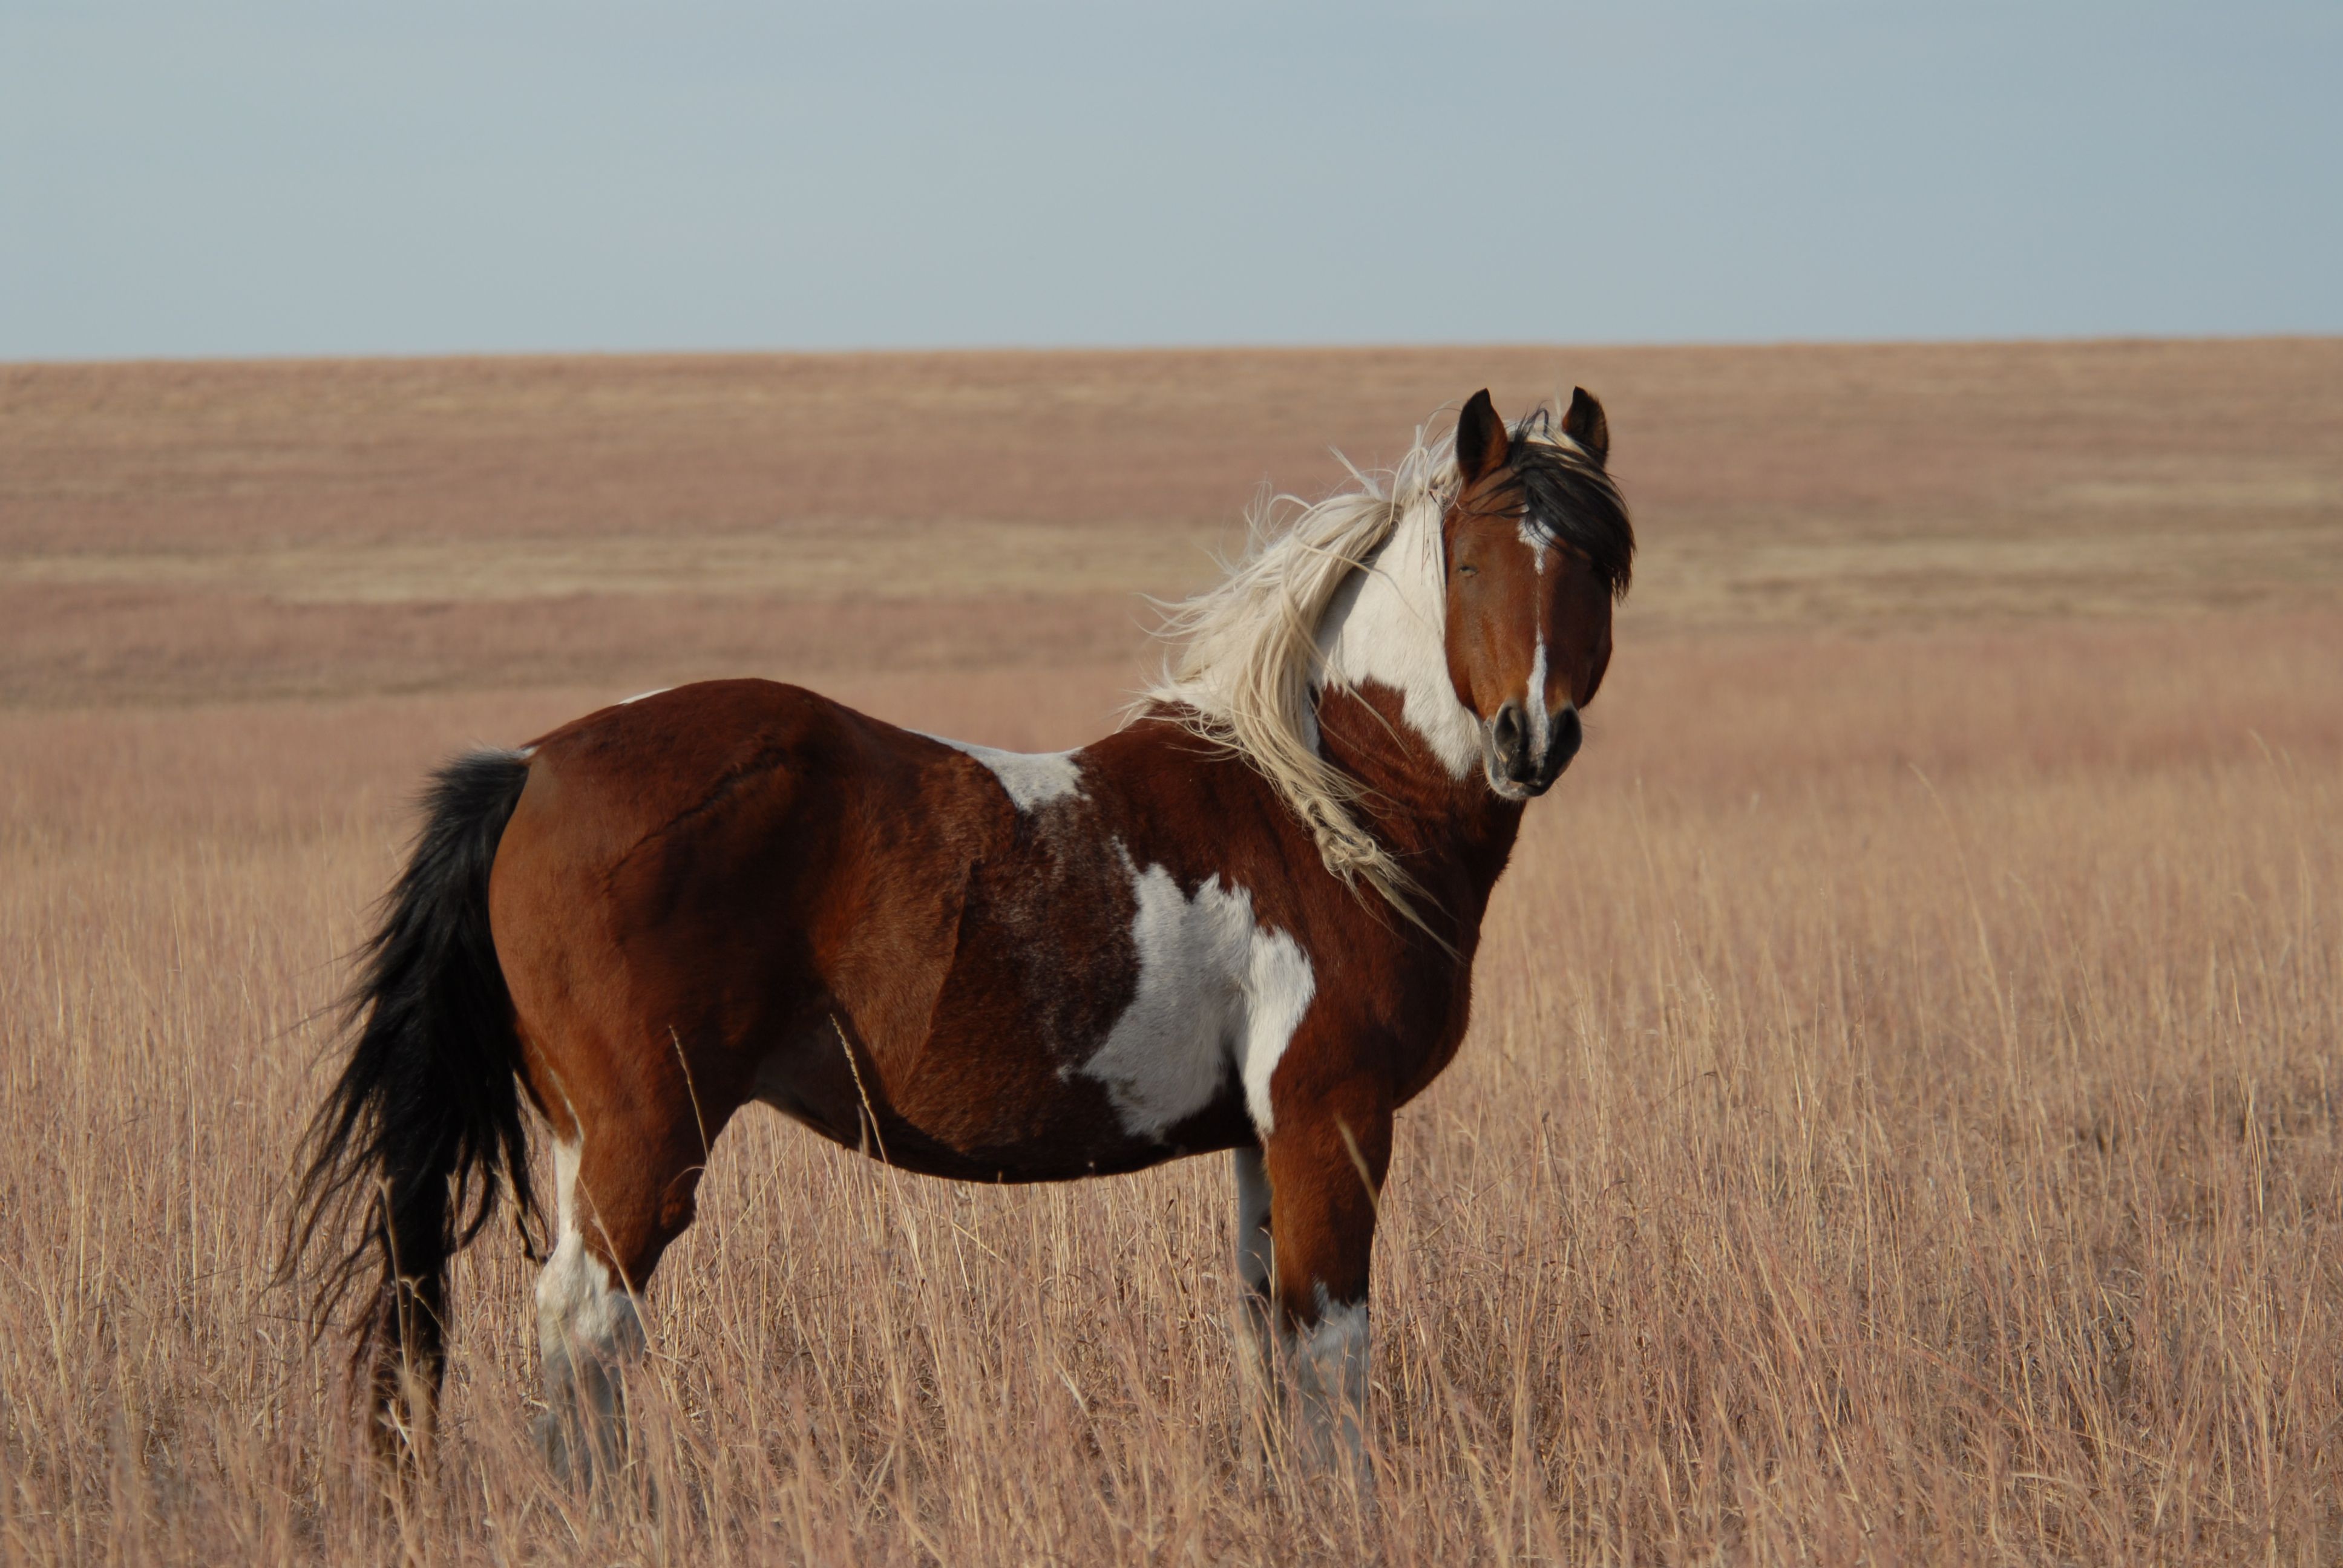 Wild Horses Running. Paint Mustang in Longterm Holding in OK- photo by Betsy Brown. Wild horse picture, Horses, Mustang horse